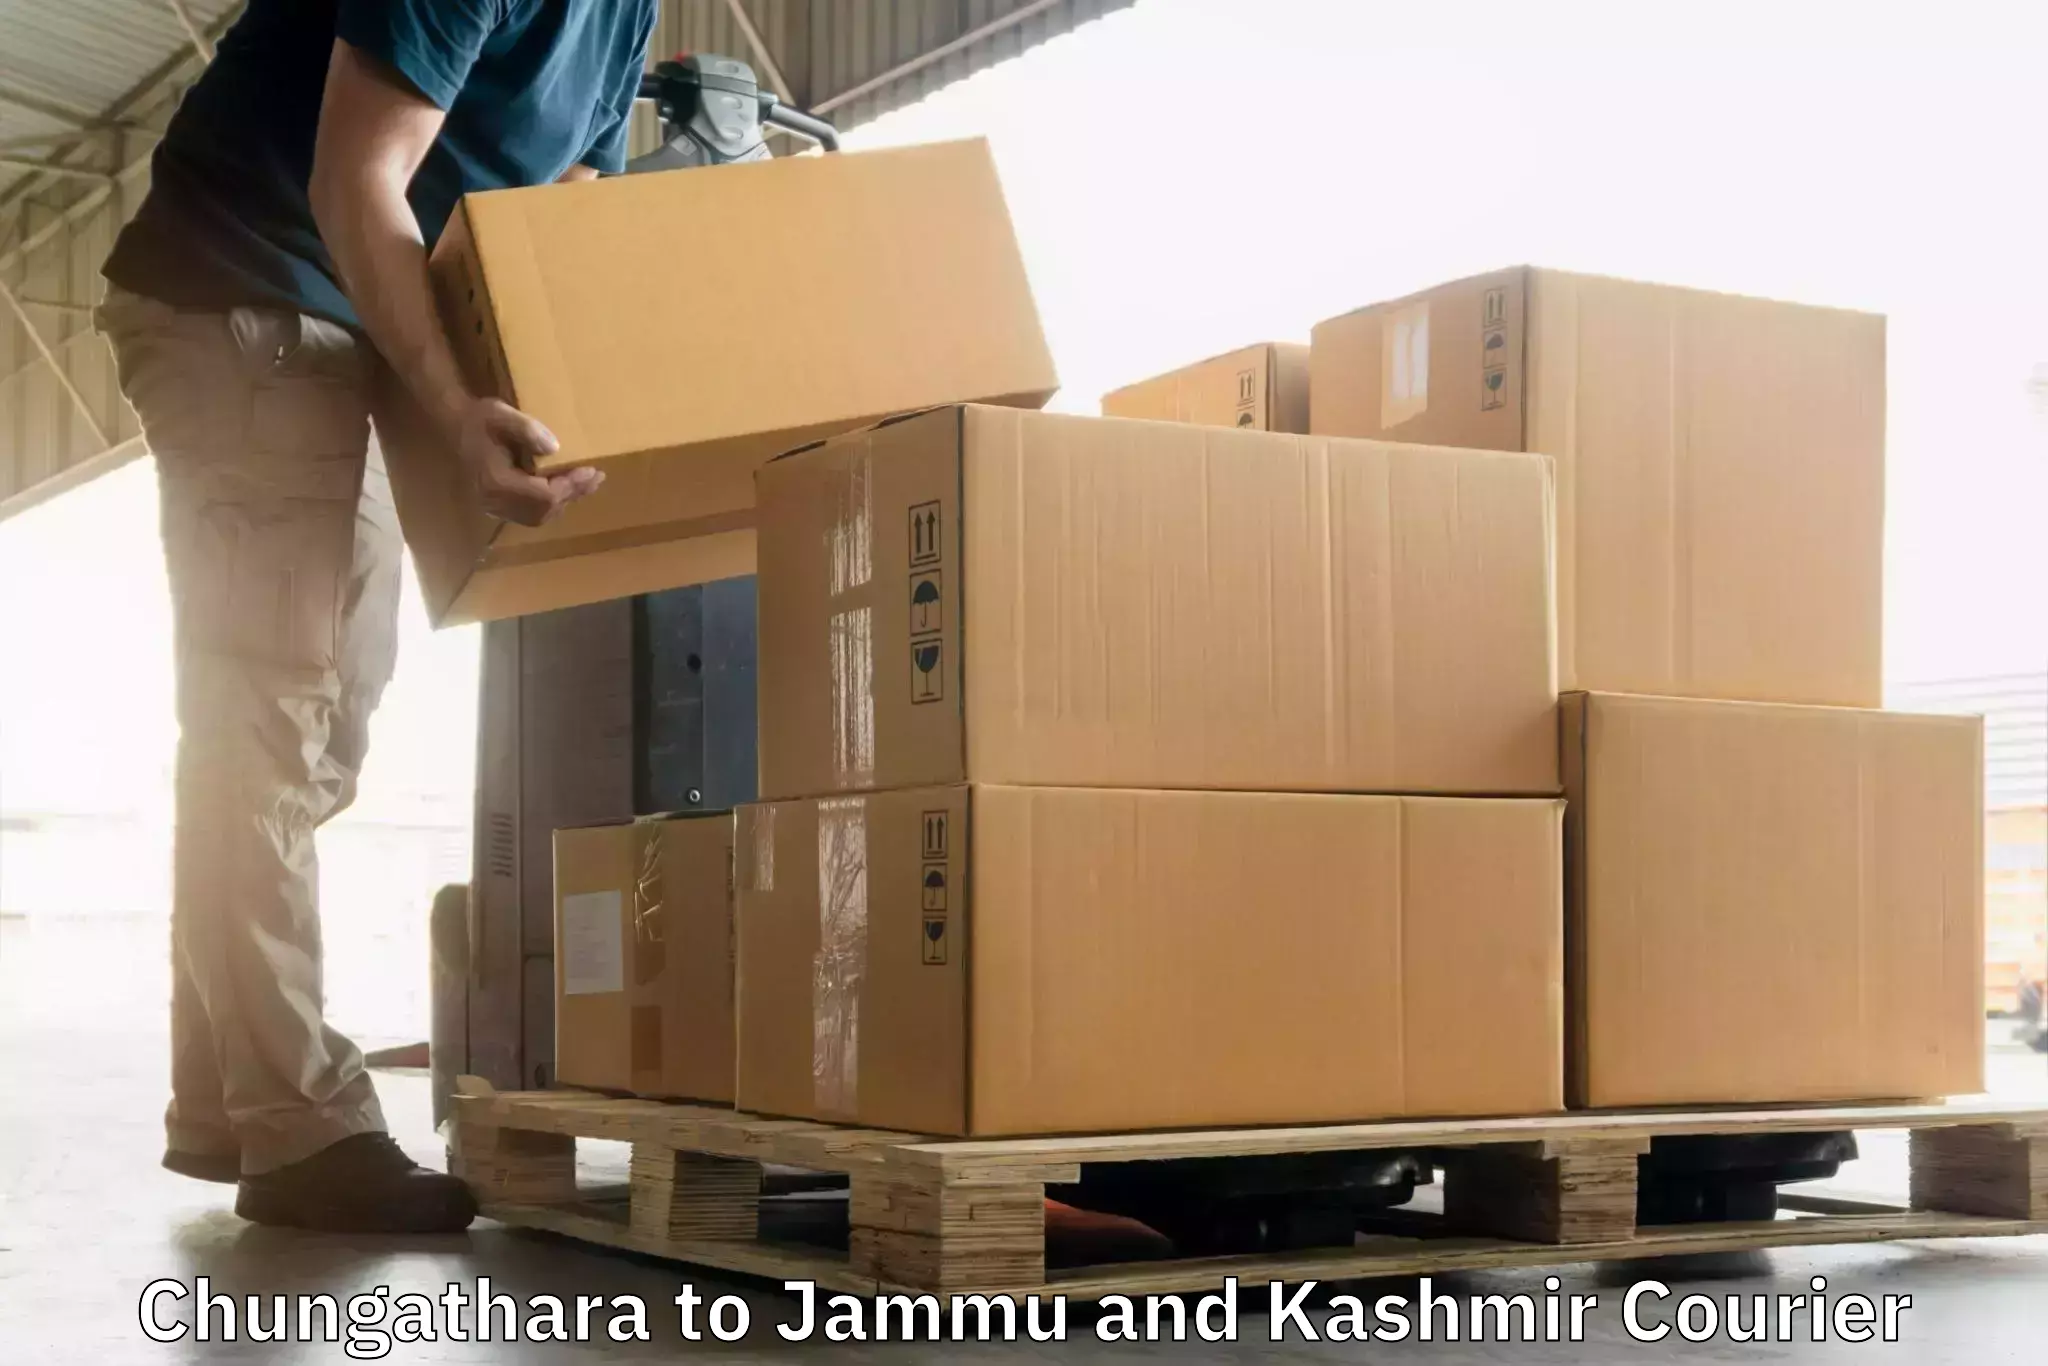 On-demand delivery in Chungathara to Anantnag